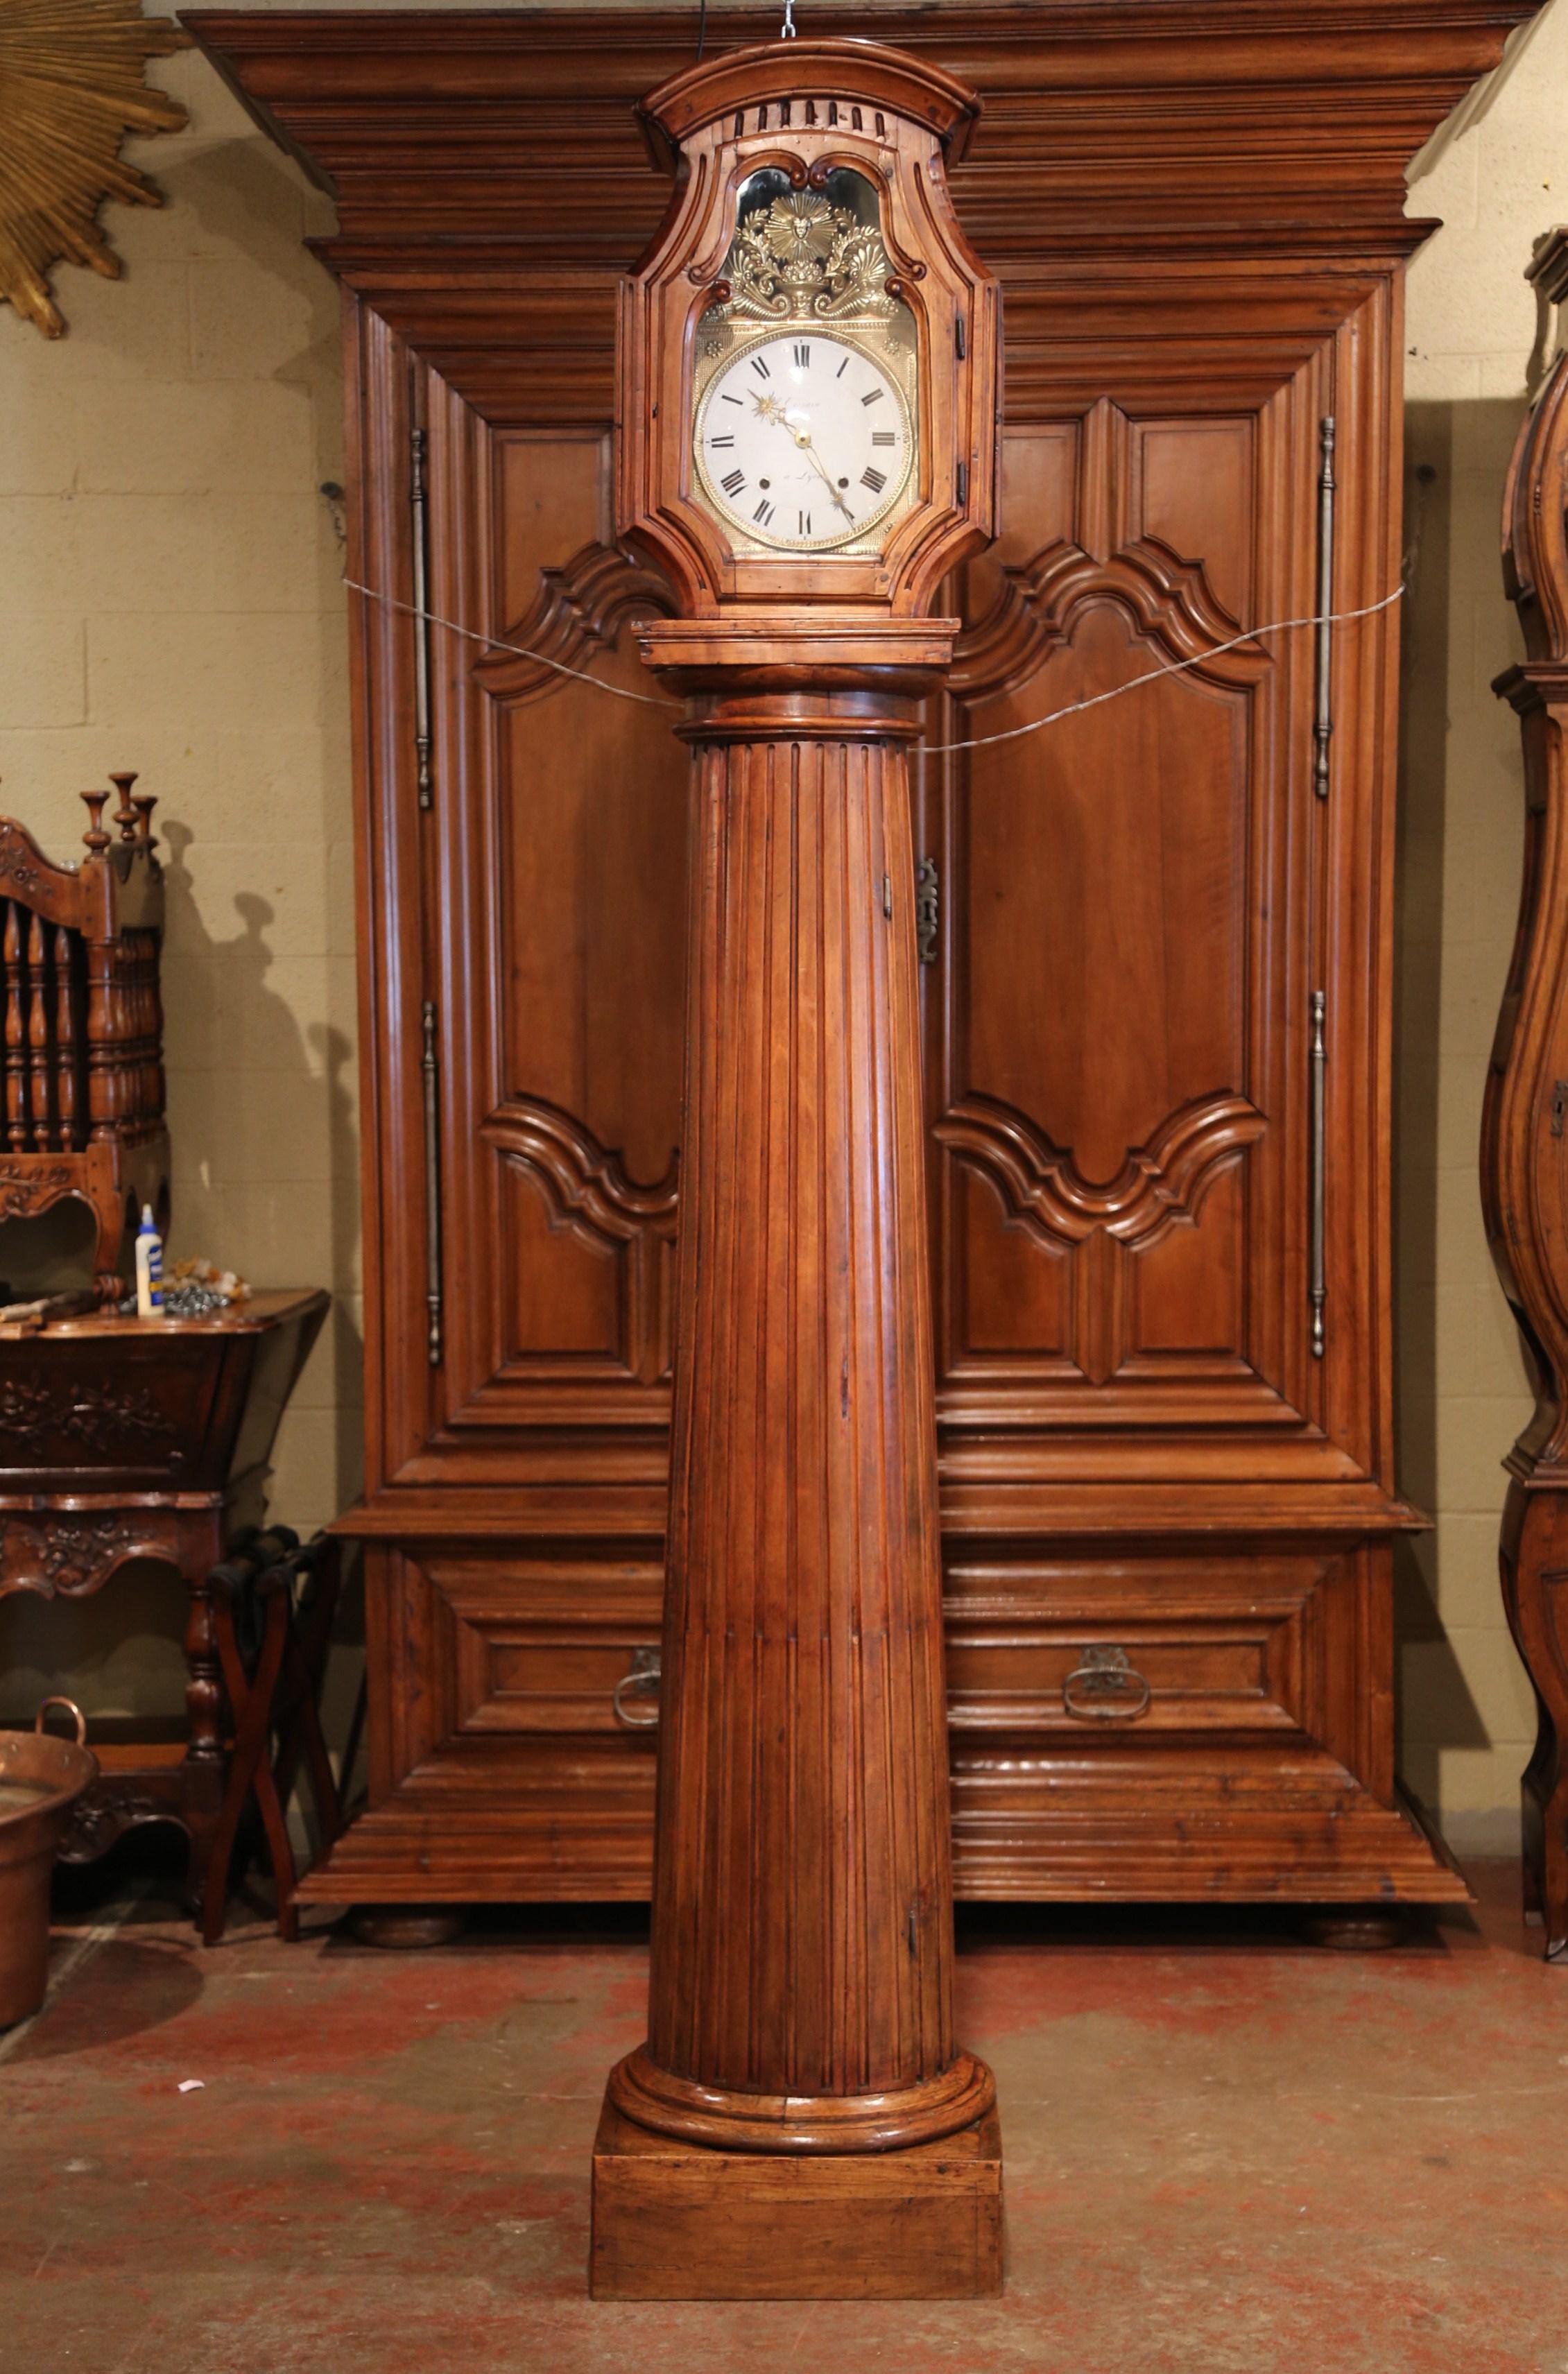 Louis XV 18th Century French Carved Walnut Grandfather Clock from Lyon